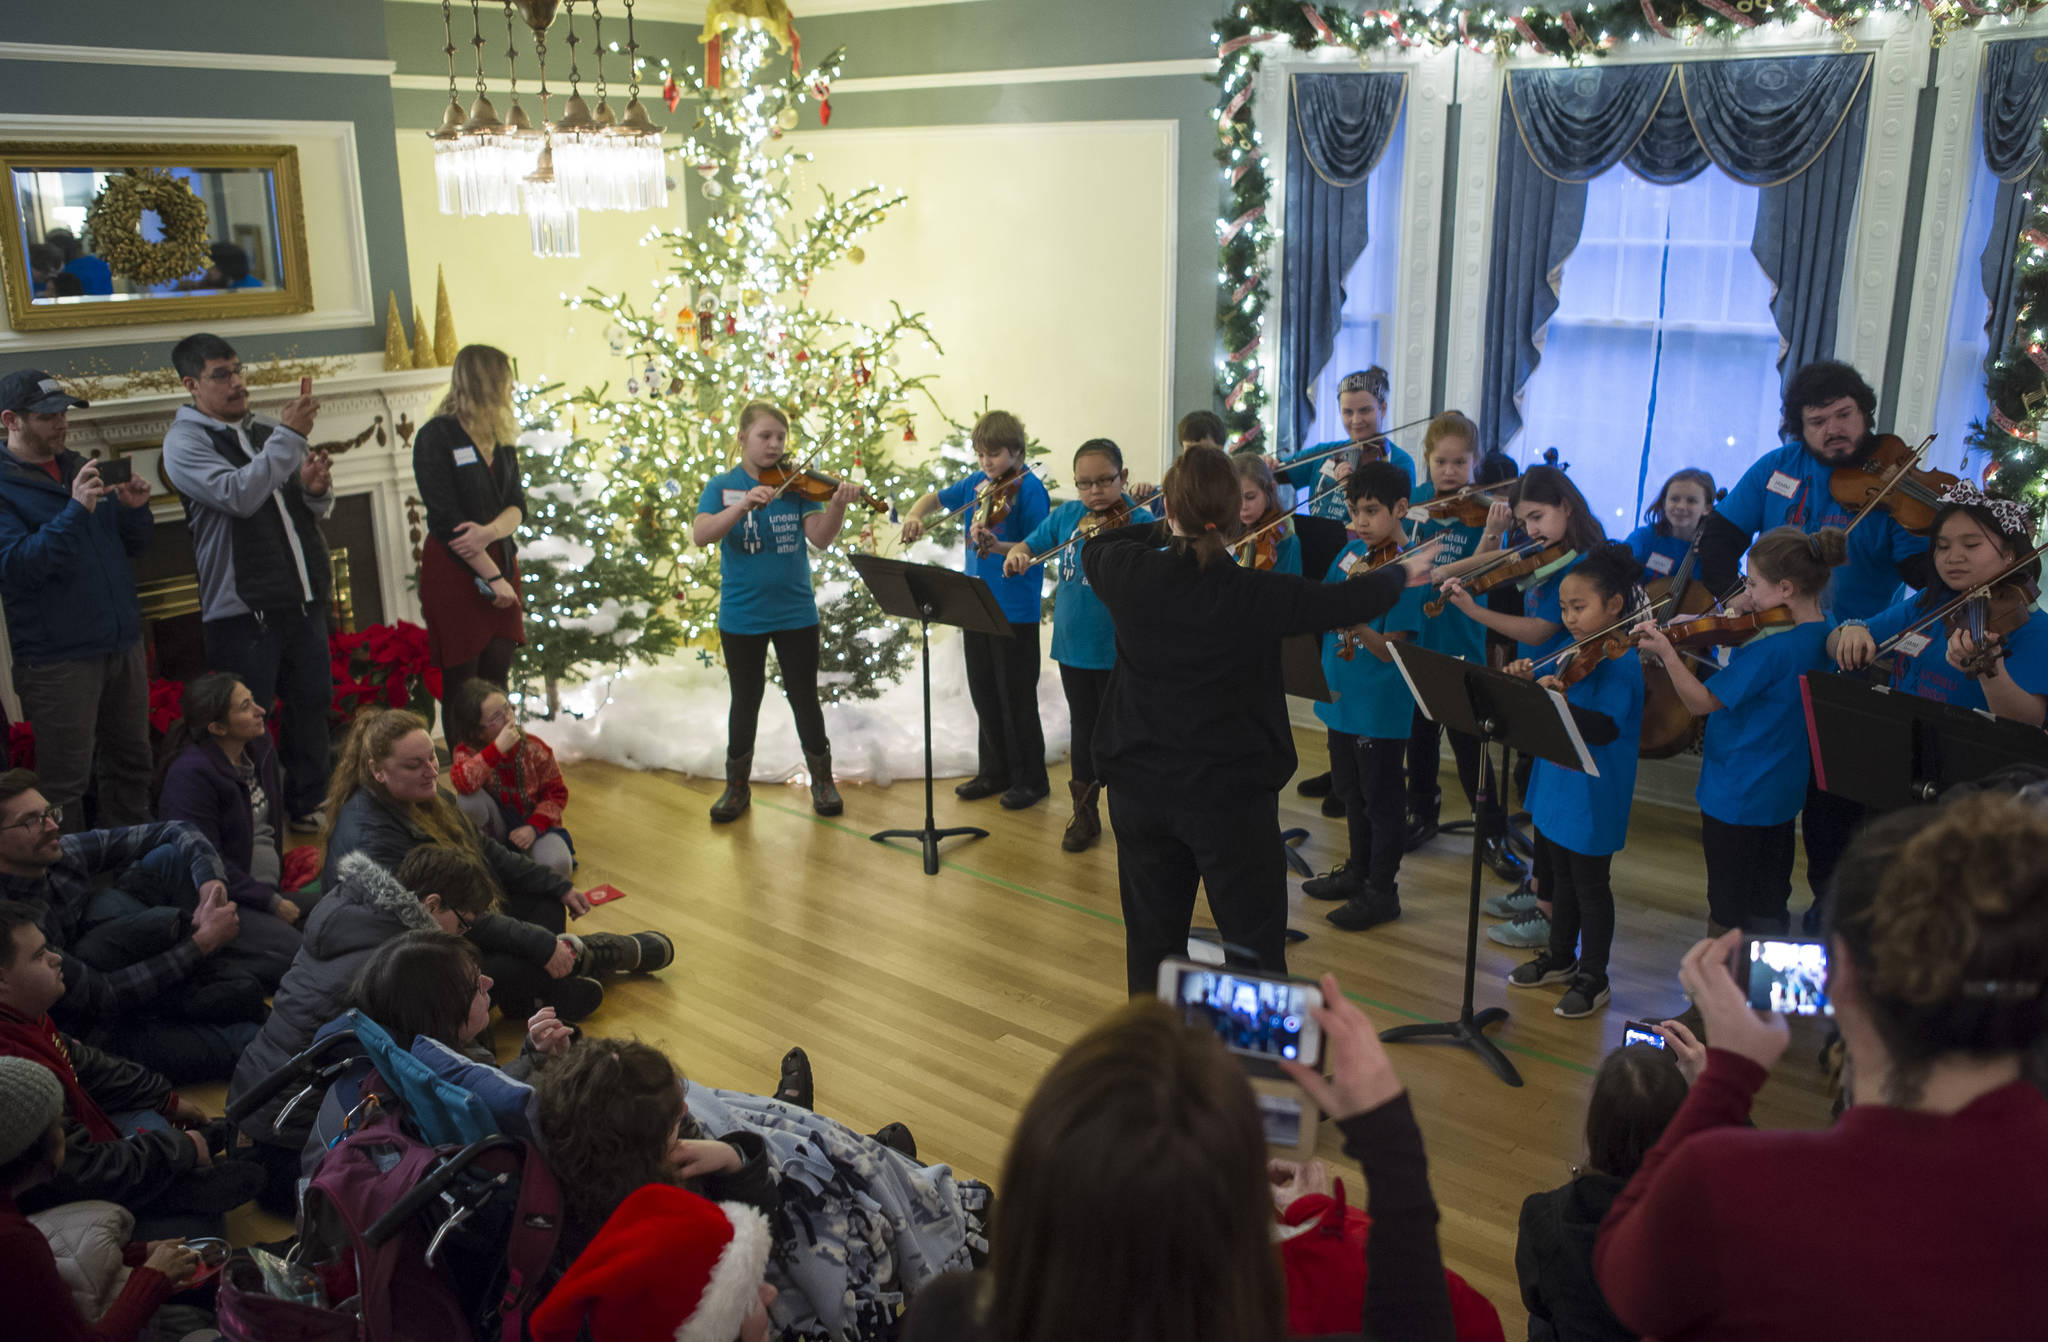 Fifth-graders in the JAMM program at Glacier Valley Elementary School perform during the Governor’s Open House on Tuesday, Dec. 5, 2017. (Michael Penn | Juneau Empire)